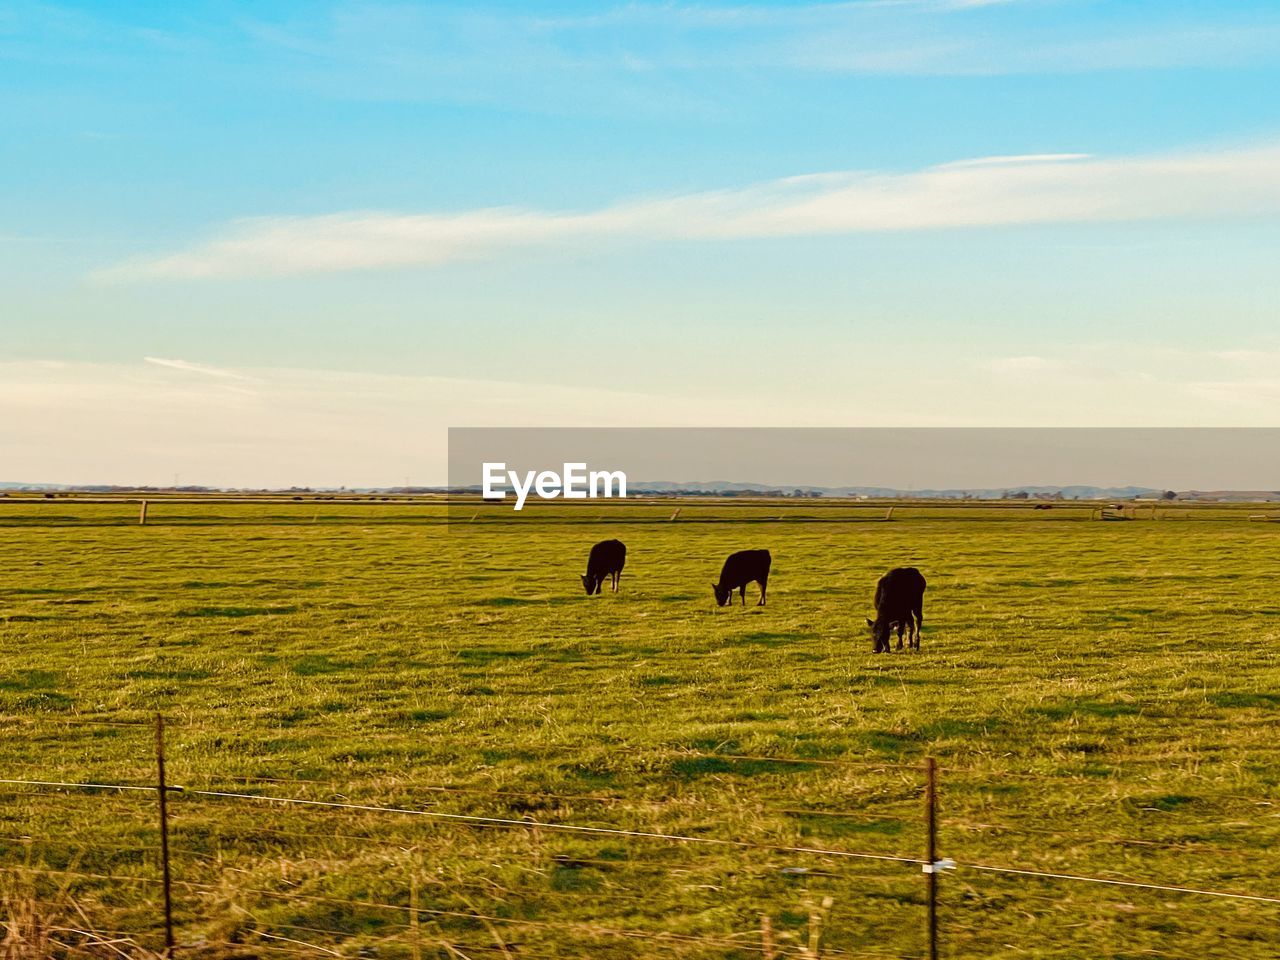 grassland, sky, natural environment, field, landscape, plain, land, mammal, prairie, animal, animal themes, domestic animals, horizon, environment, nature, agriculture, livestock, grass, plant, pasture, group of animals, beauty in nature, steppe, grazing, cloud, pet, rural scene, scenics - nature, tranquil scene, rural area, hill, tranquility, morning, day, farm, no people, animal wildlife, meadow, cattle, outdoors, sunlight, non-urban scene, horizon over land, cow, idyllic, growth, herbivorous